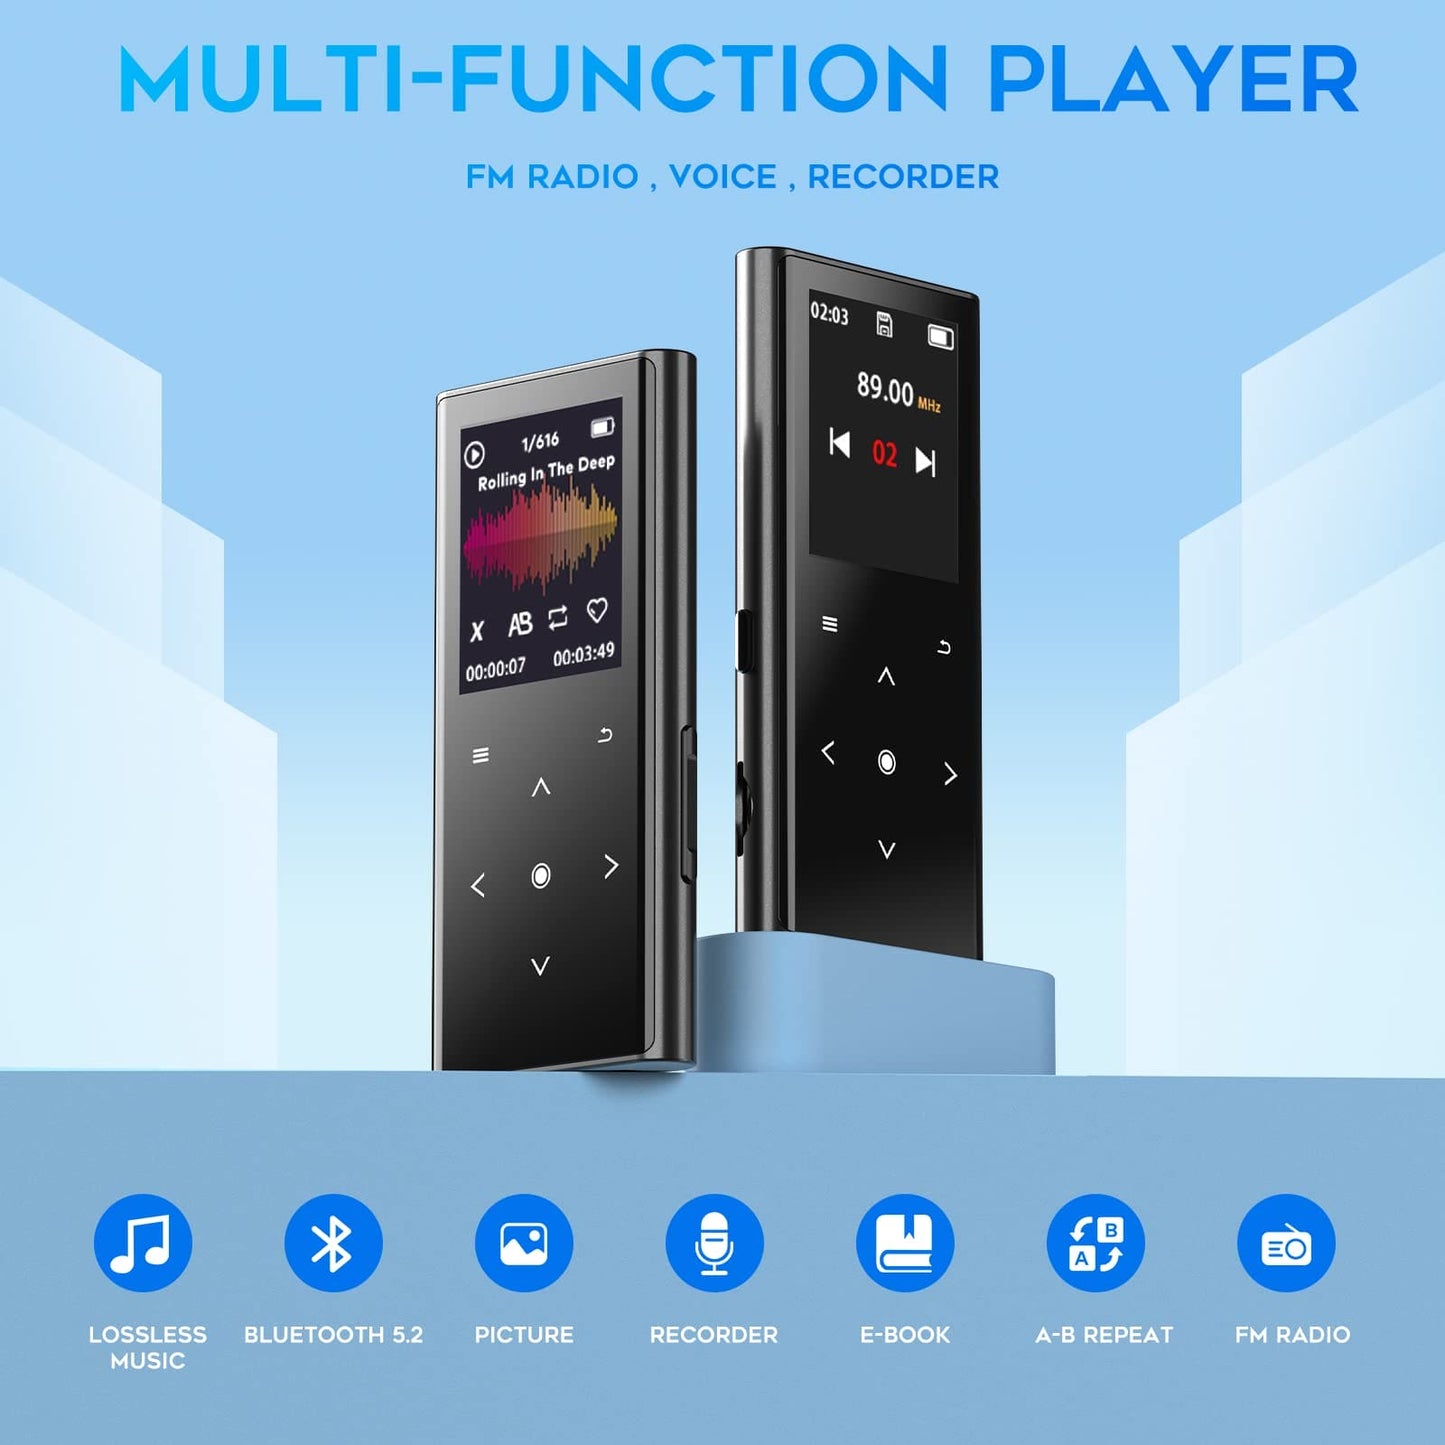 128GB MP3 Player, ZOOAOXO Music Player with Bluetooth 5.2, Built-in HD Speaker, FM Radio, Voice Recorder, Mini Design, Weigh 2.4 oz, HiFi Sound, Ideal for Sport, Earphones Included